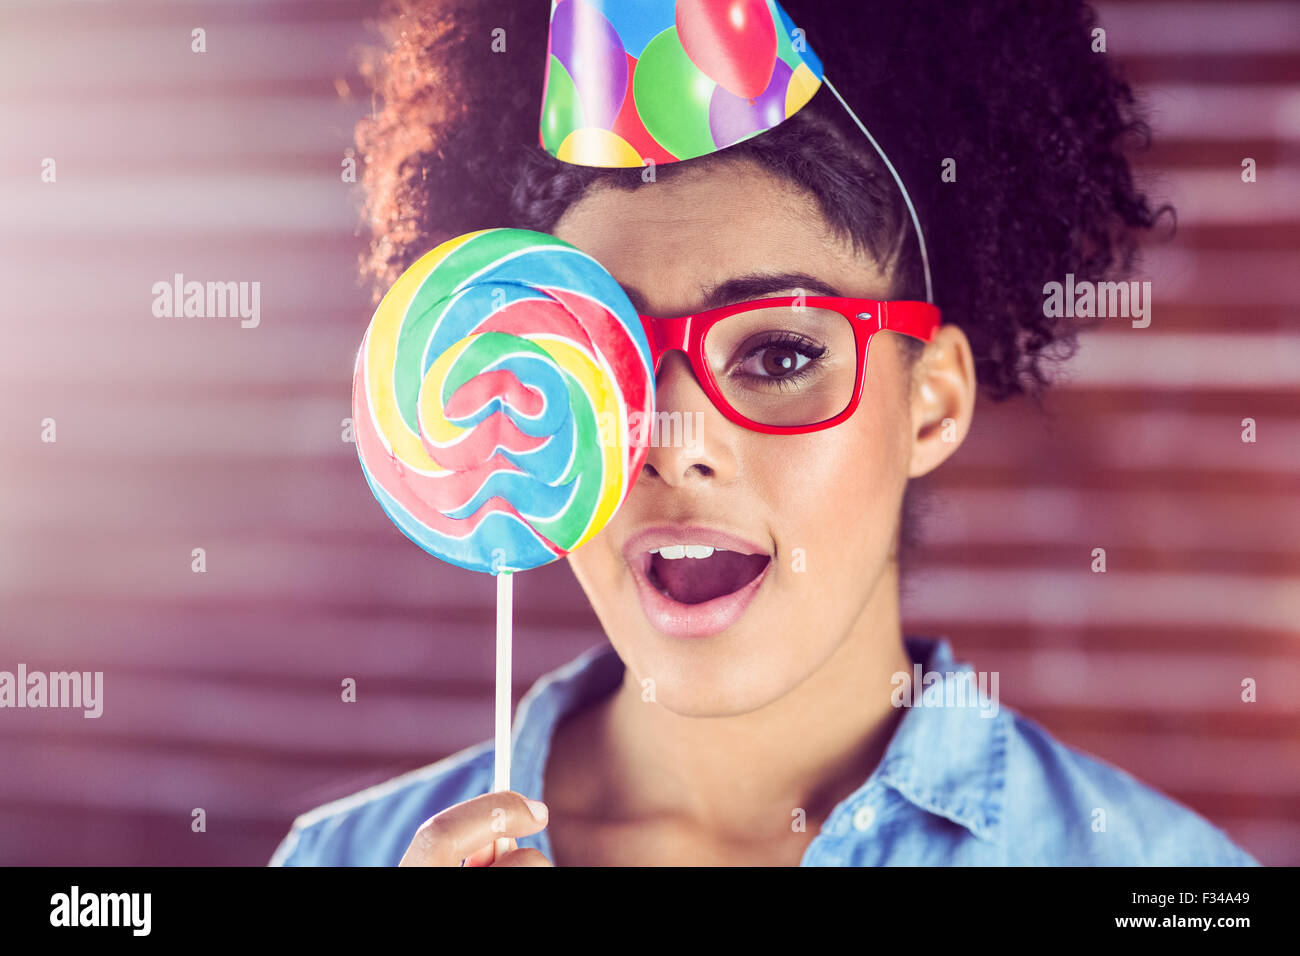 Surprised young woman holding a lollipop against her face Stock Photo